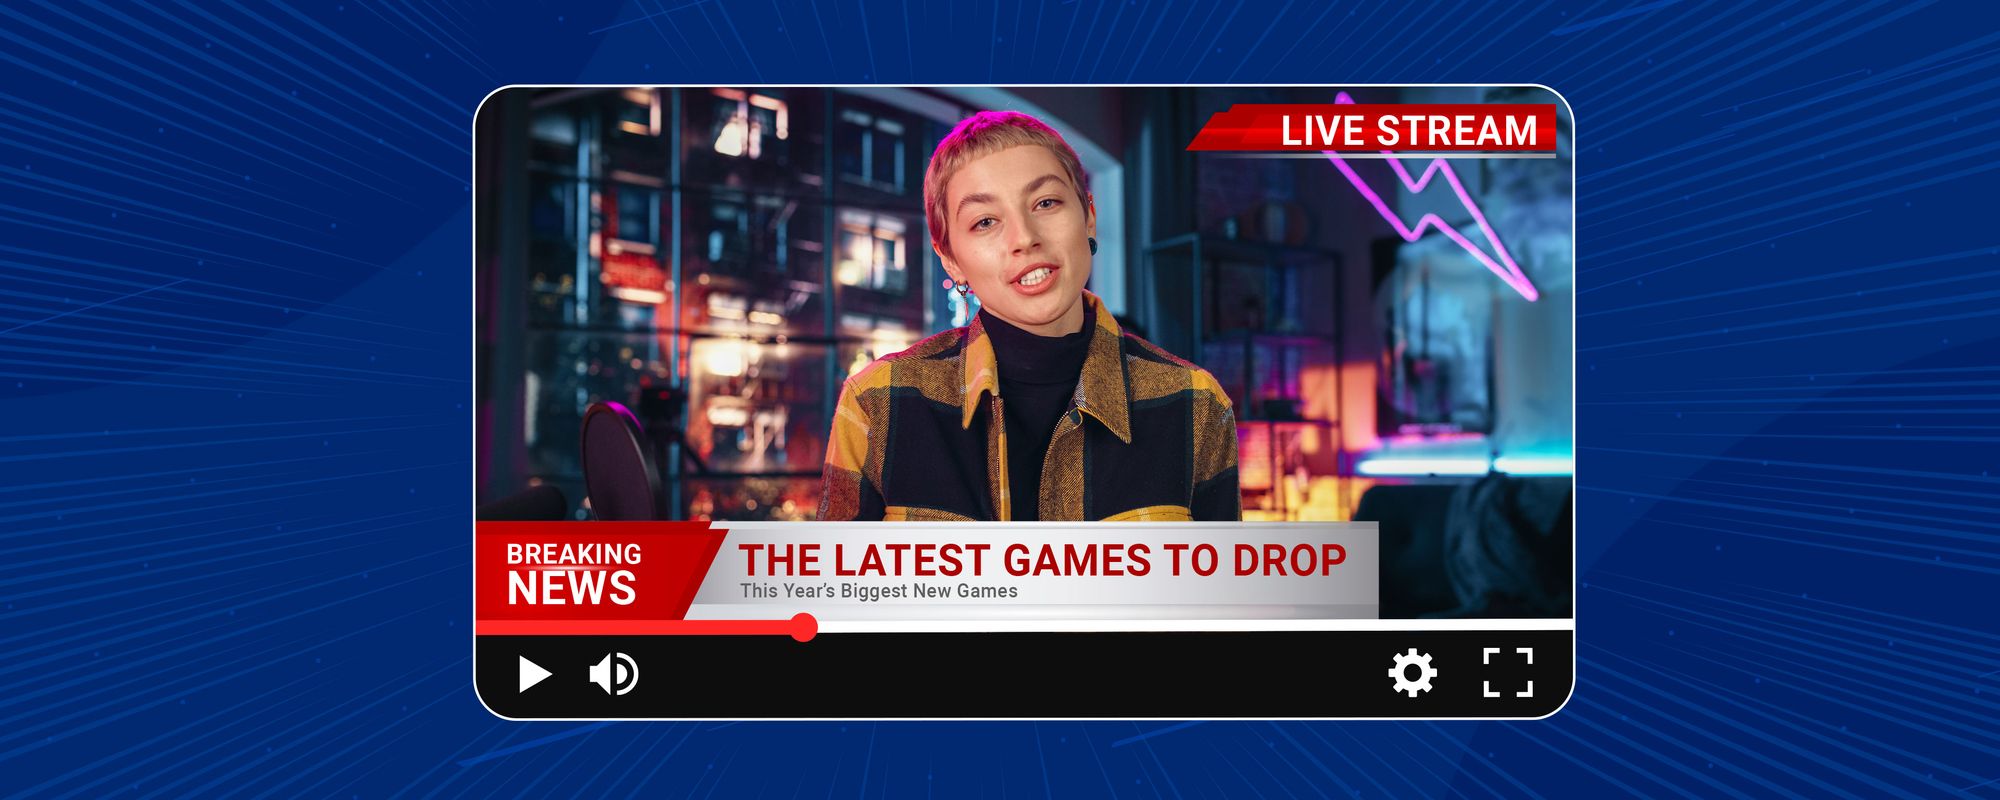 Image of a gaming creator in a news screen setup to highlight potential gaming video ideas based on the latest news.